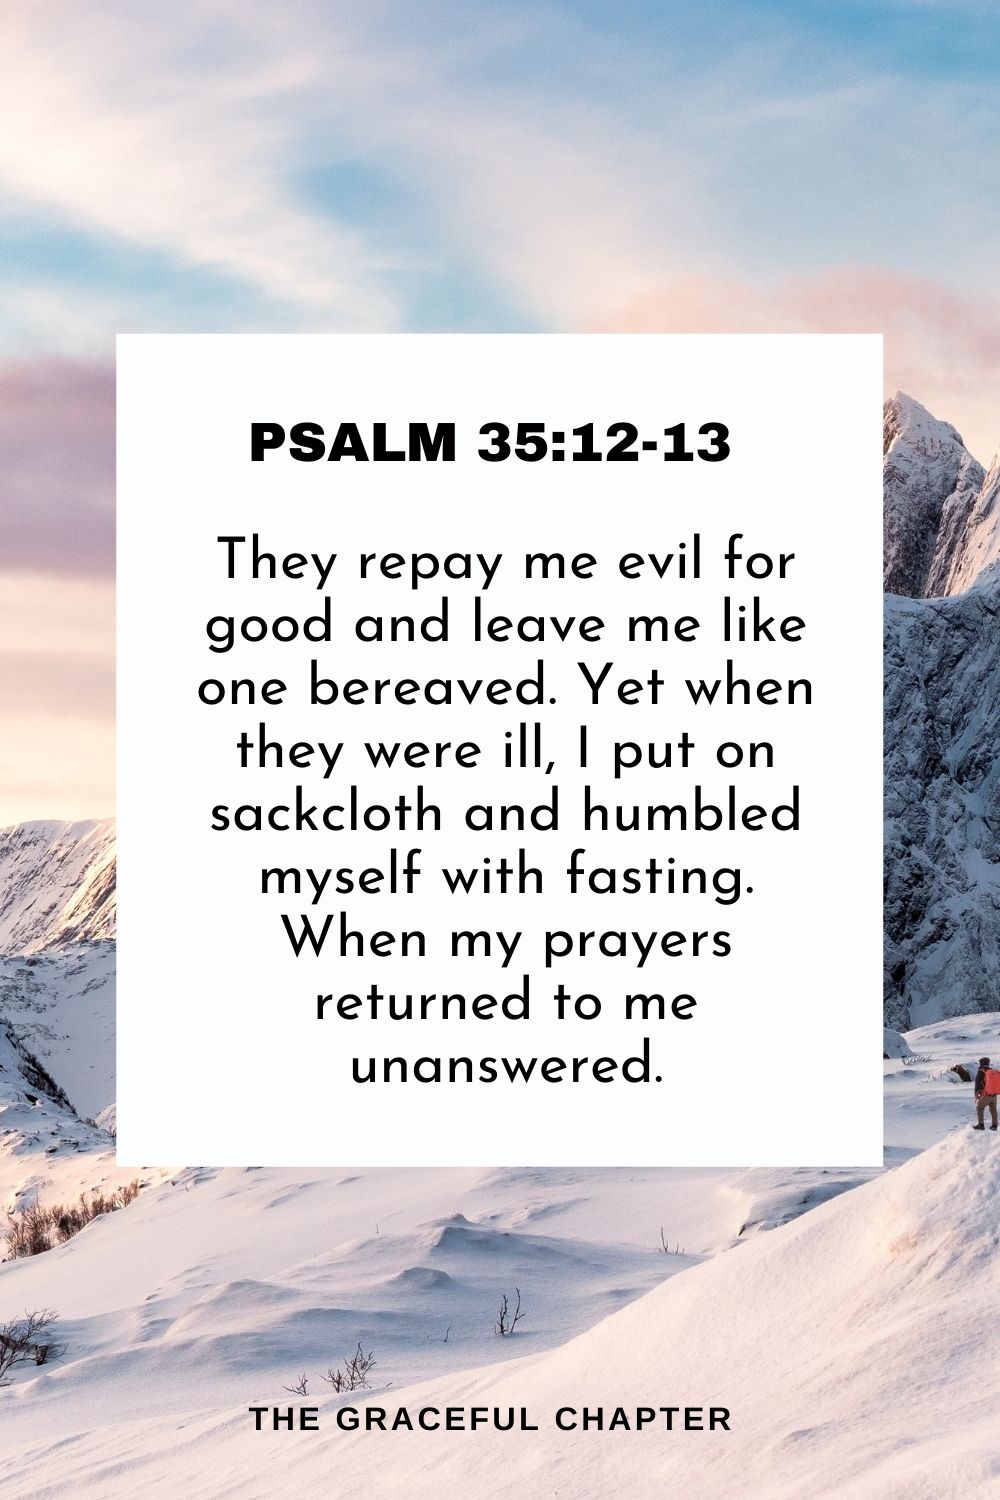 They repay me evil for good and leave me like one bereaved. Yet when they were ill, I put on sackcloth and humbled myself with fasting. When my prayers returned to me unanswered. Psalm 35:12-13